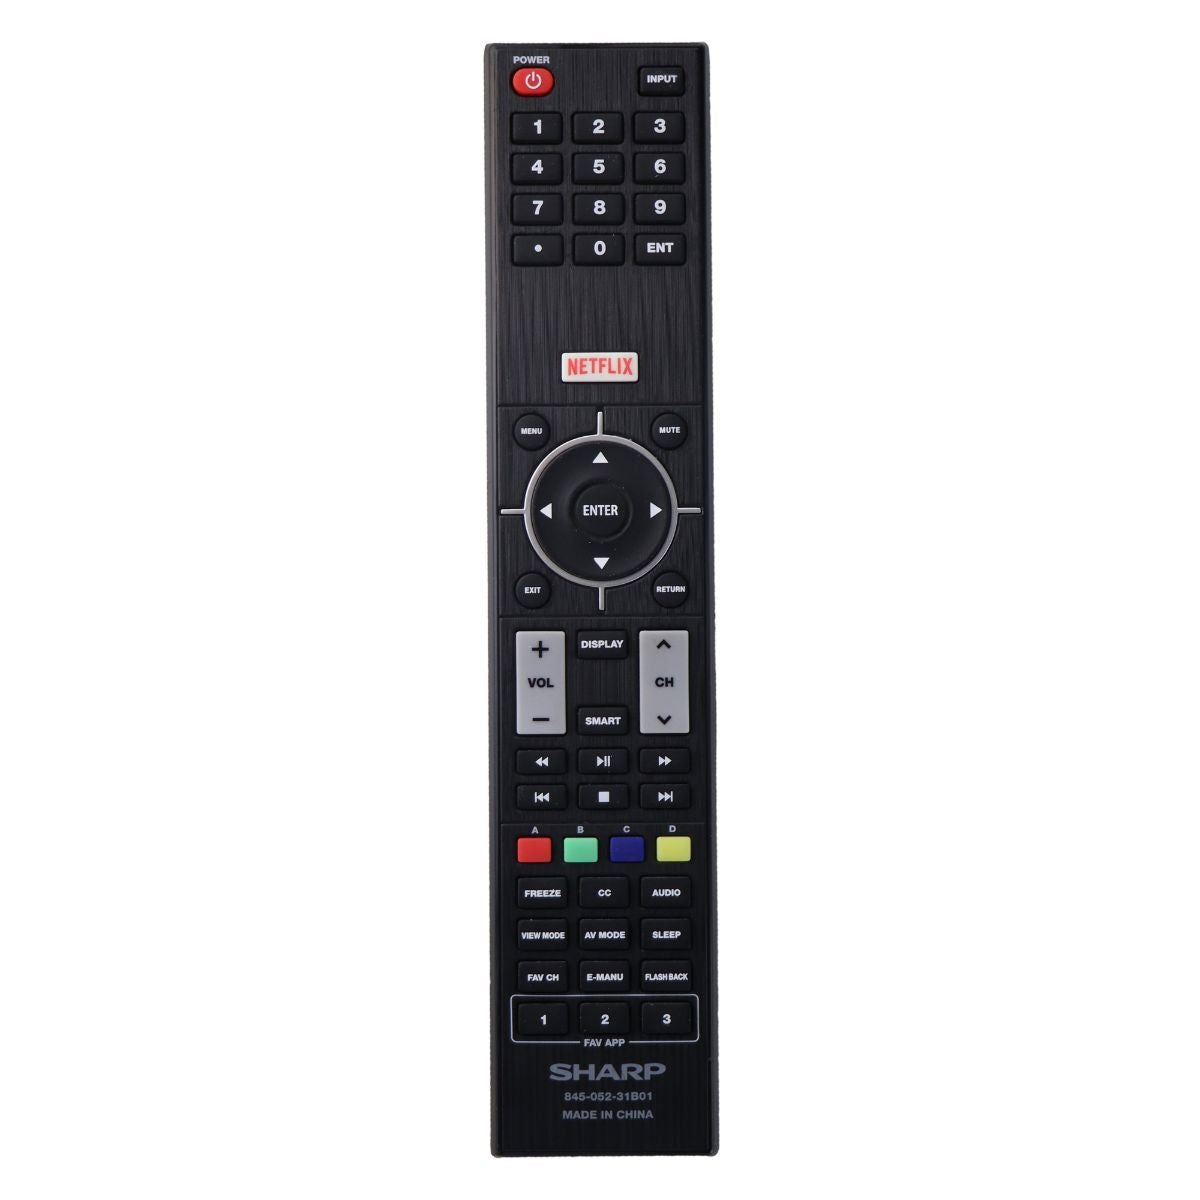 Sharp Remote (845-052-31B01) for Sharp LC-60LE644U by Hisense - Black TV, Video & Audio Accessories - Remote Controls SHARP    - Simple Cell Bulk Wholesale Pricing - USA Seller